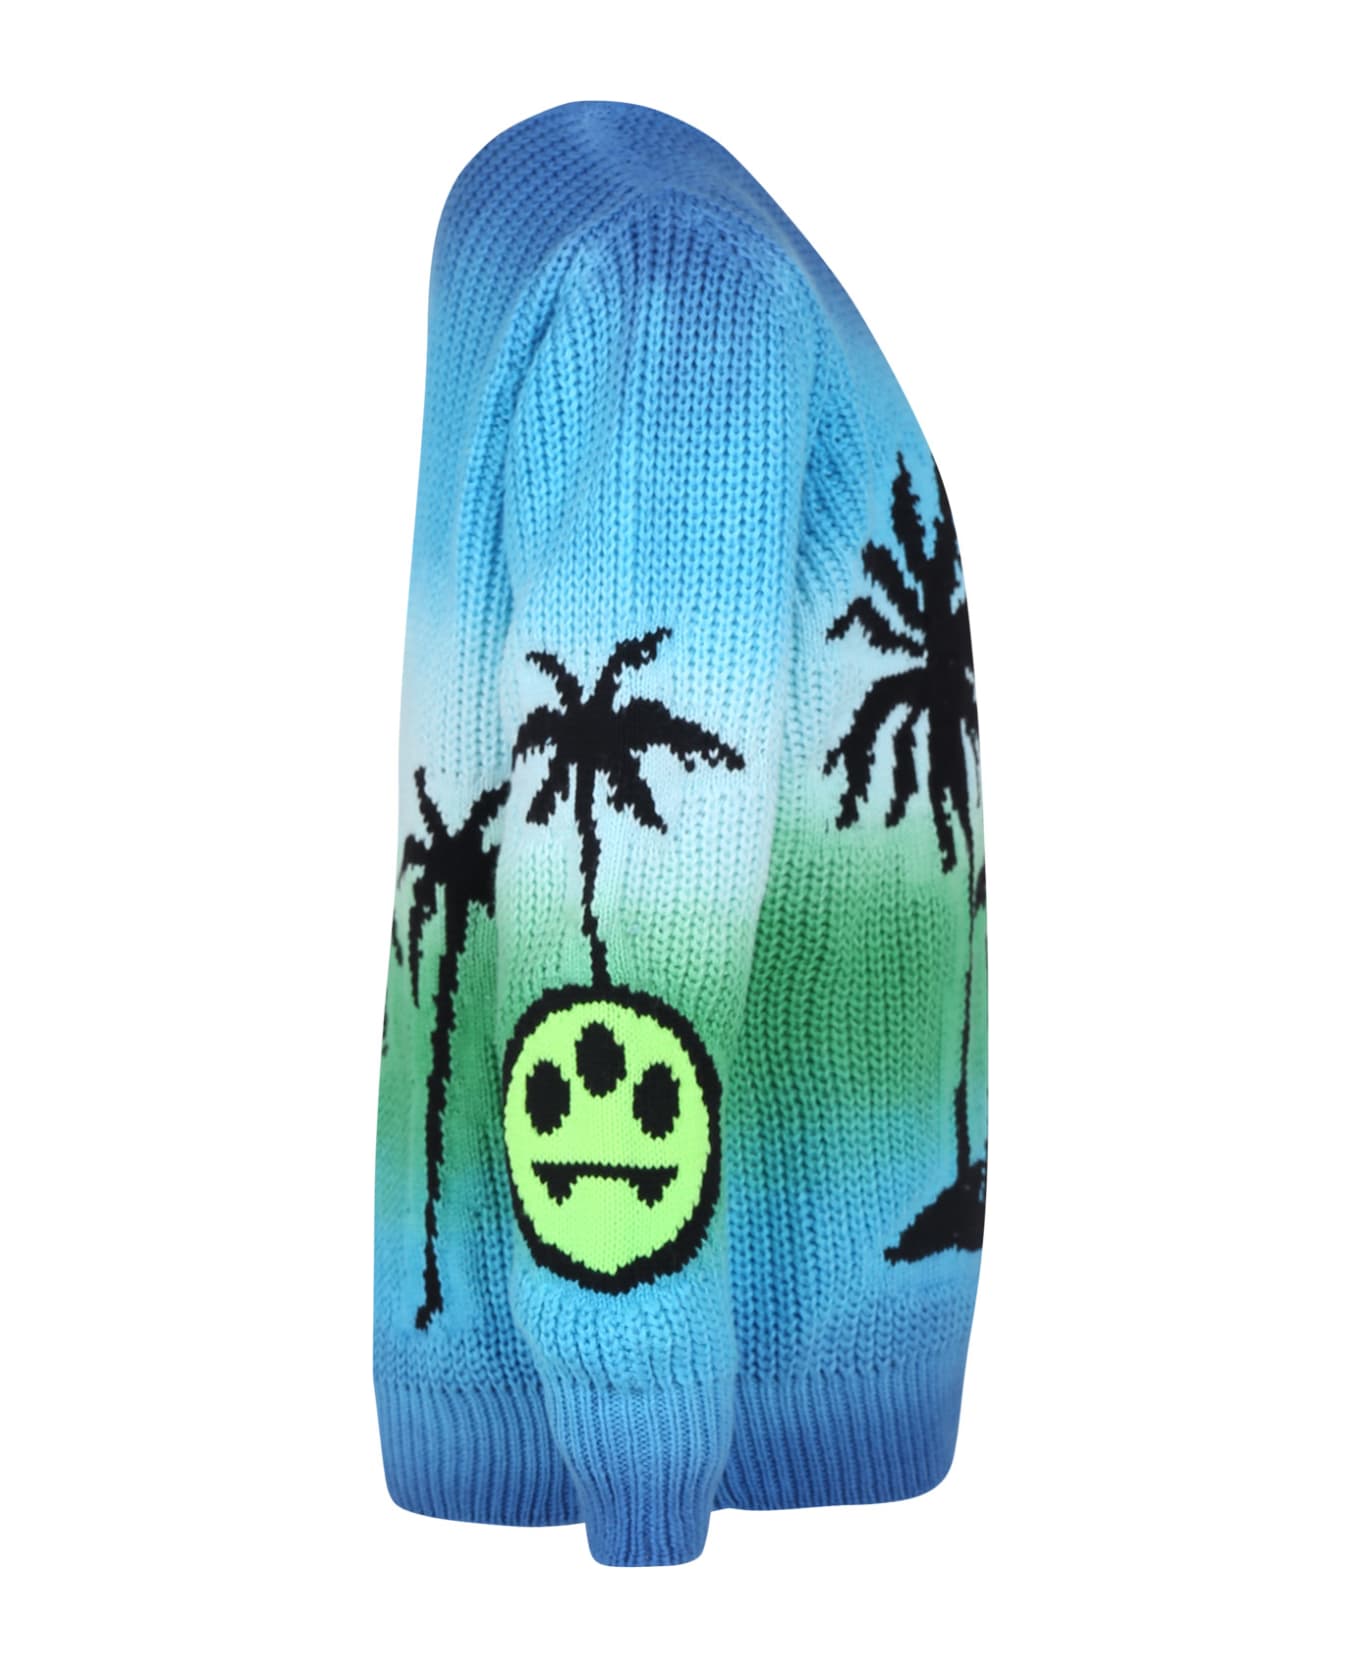 Barrow Light Blue Cotton Sweater For Kids With Smiley And Palm Trees - Light Blue